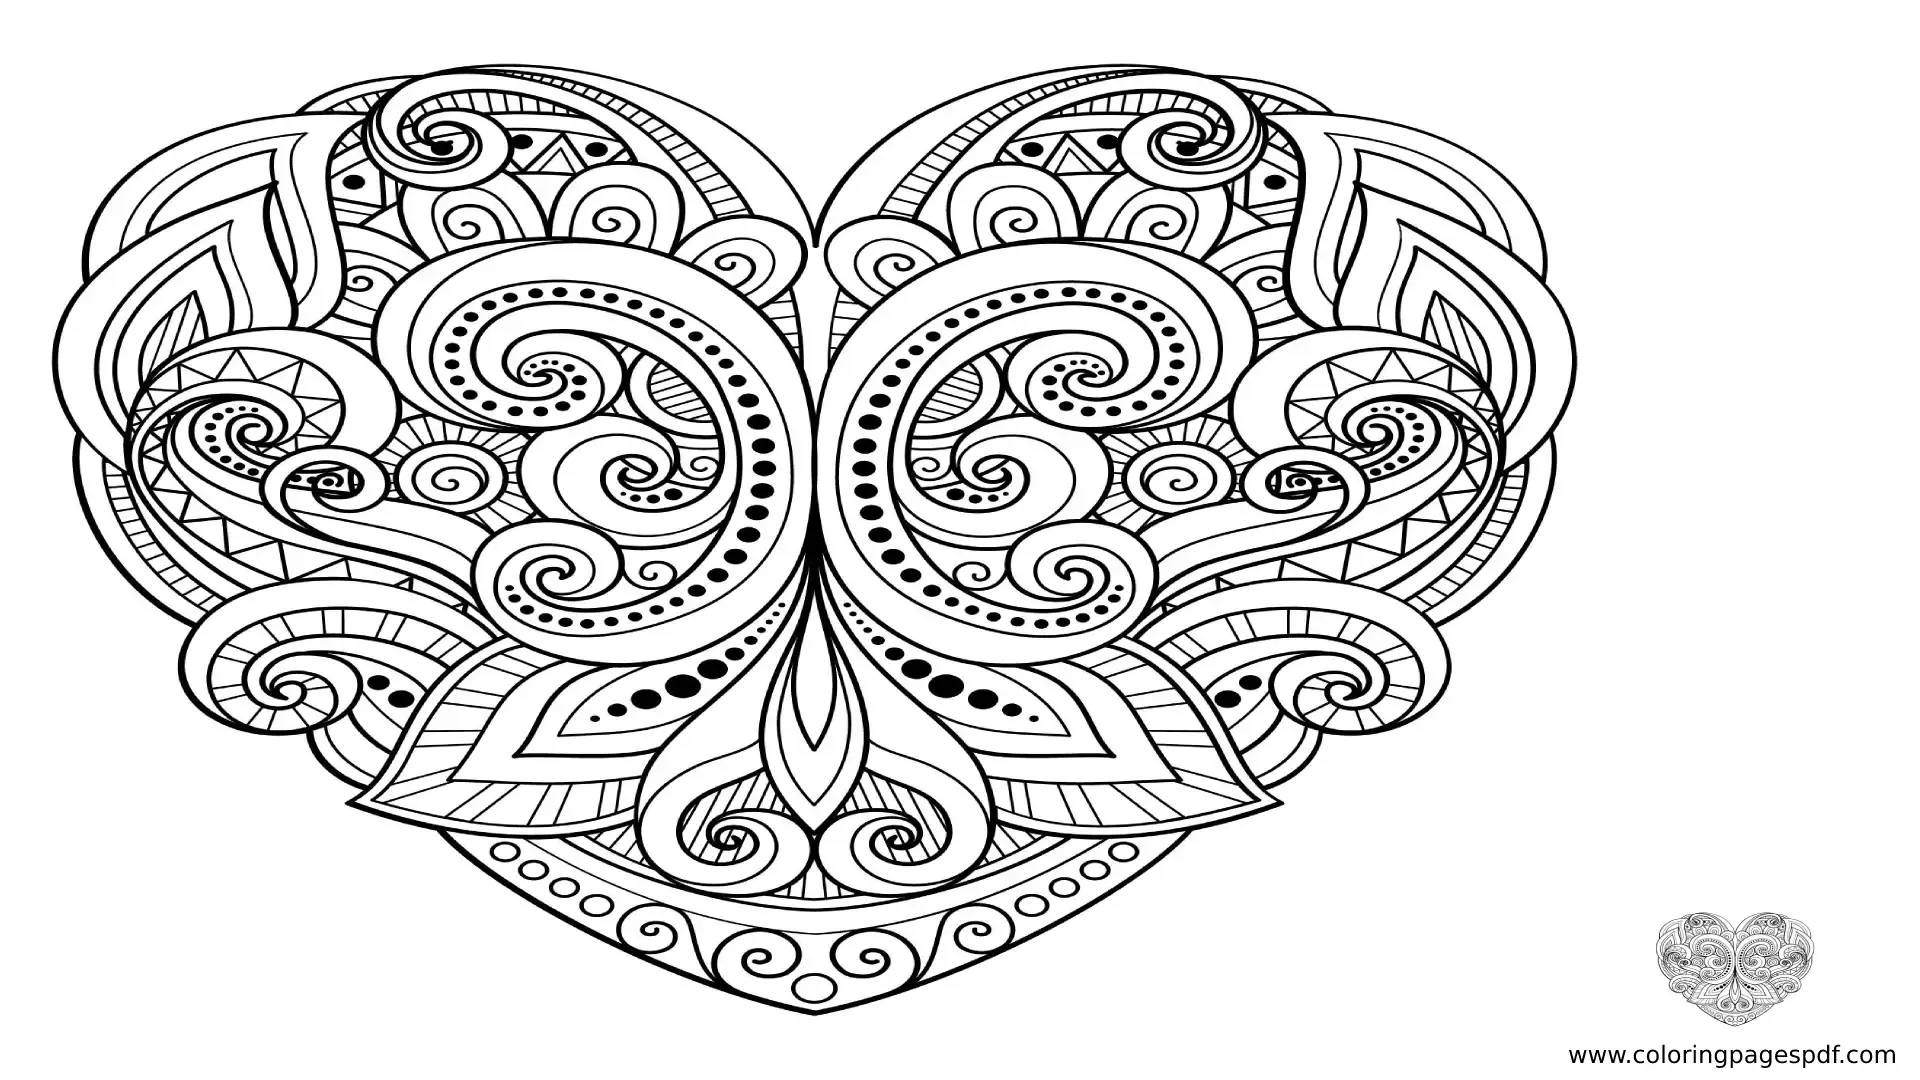 Coloring Pages Of A Detailed Heart Mandala